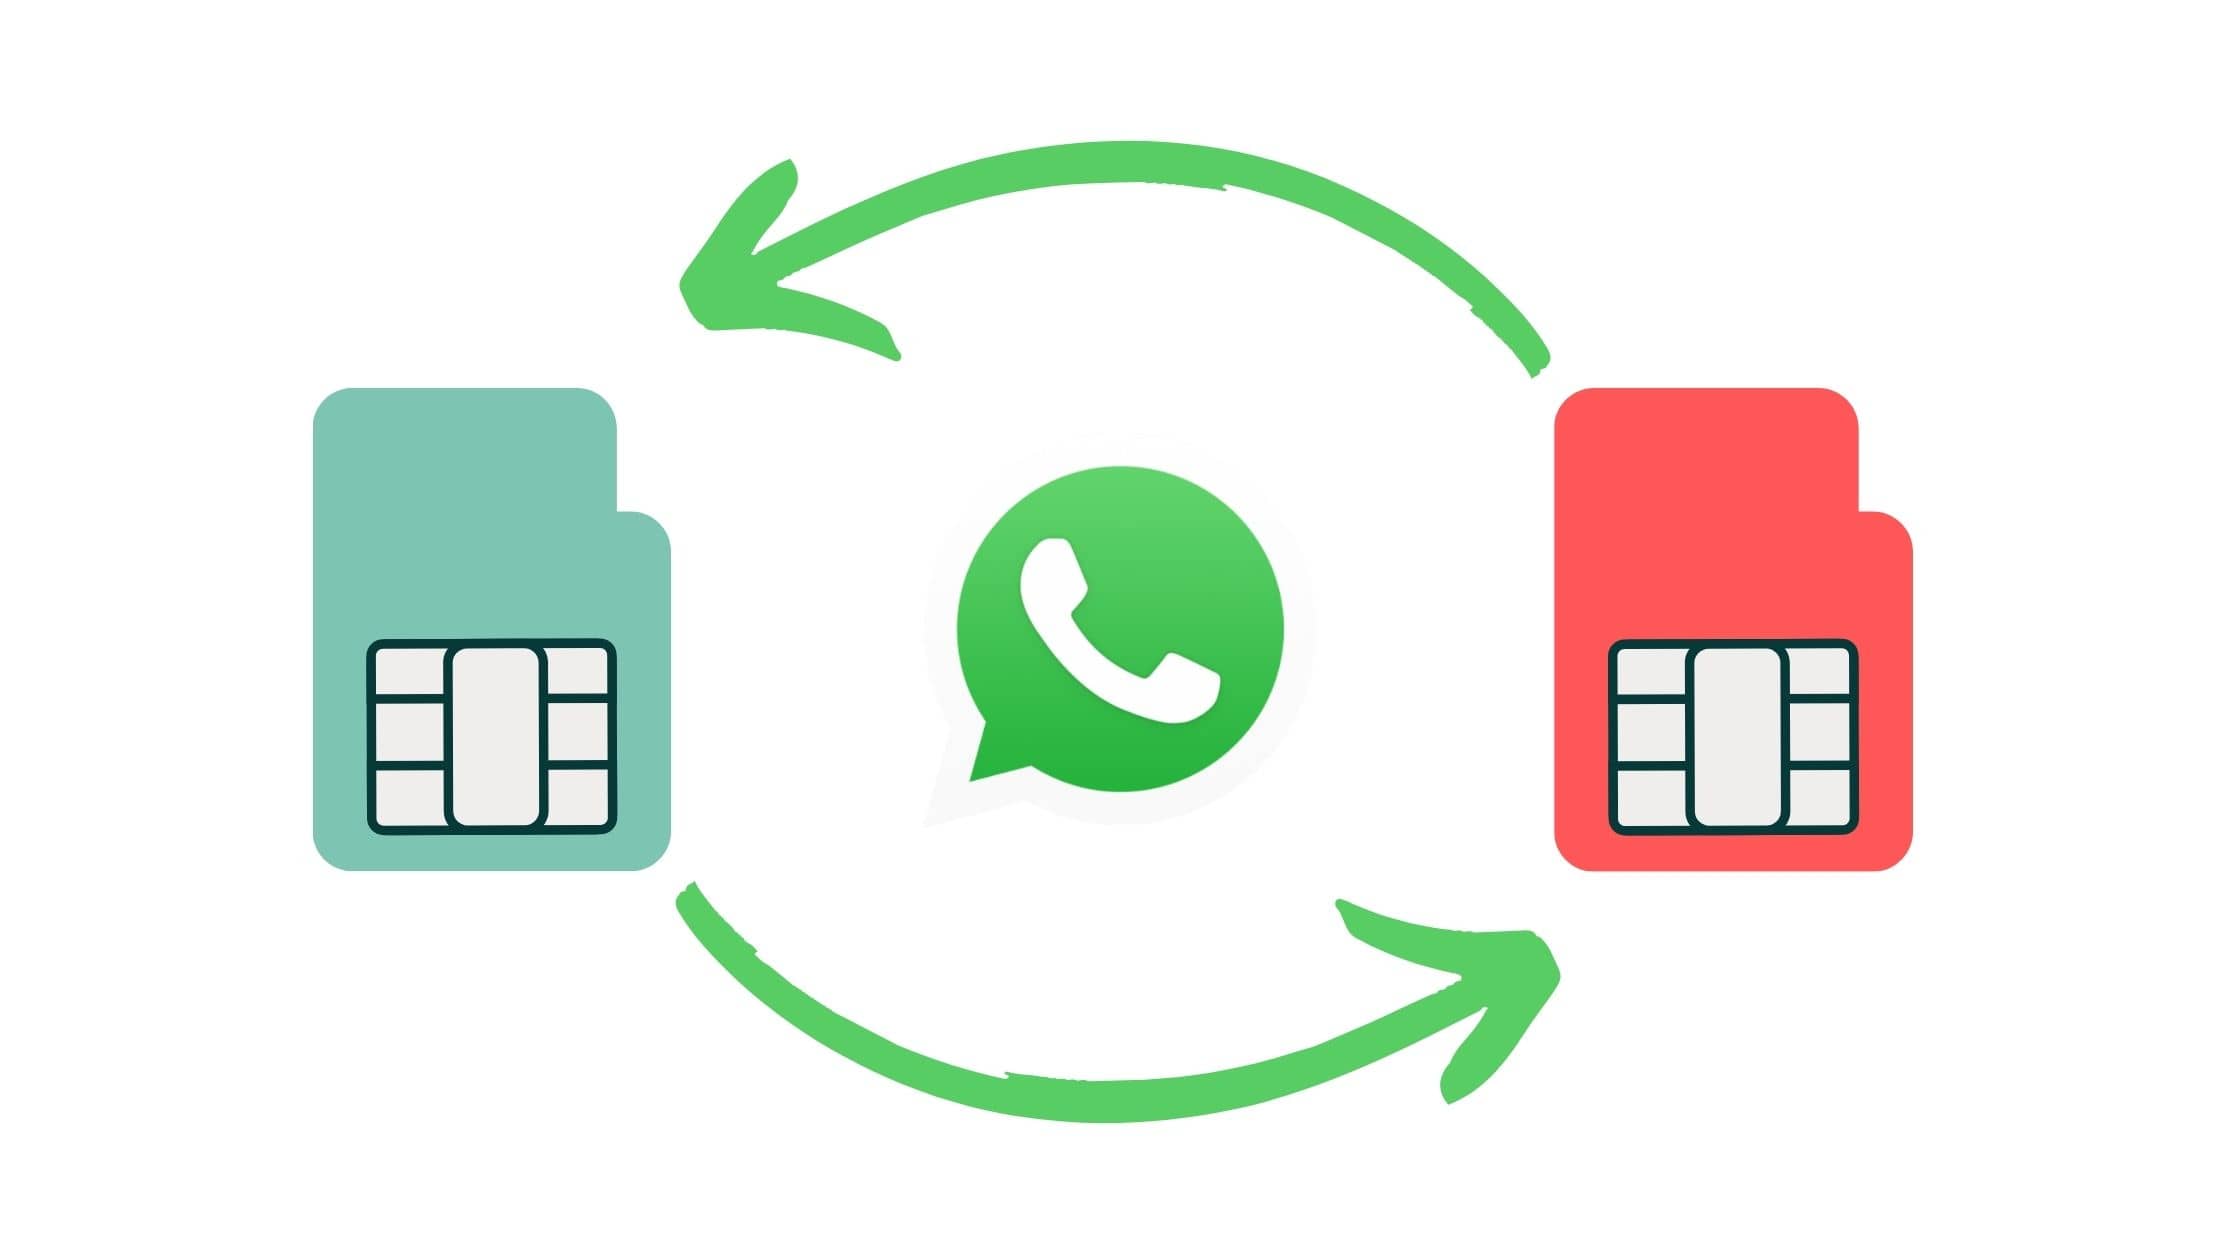 How to Change WhatsApp Number without losing Chats